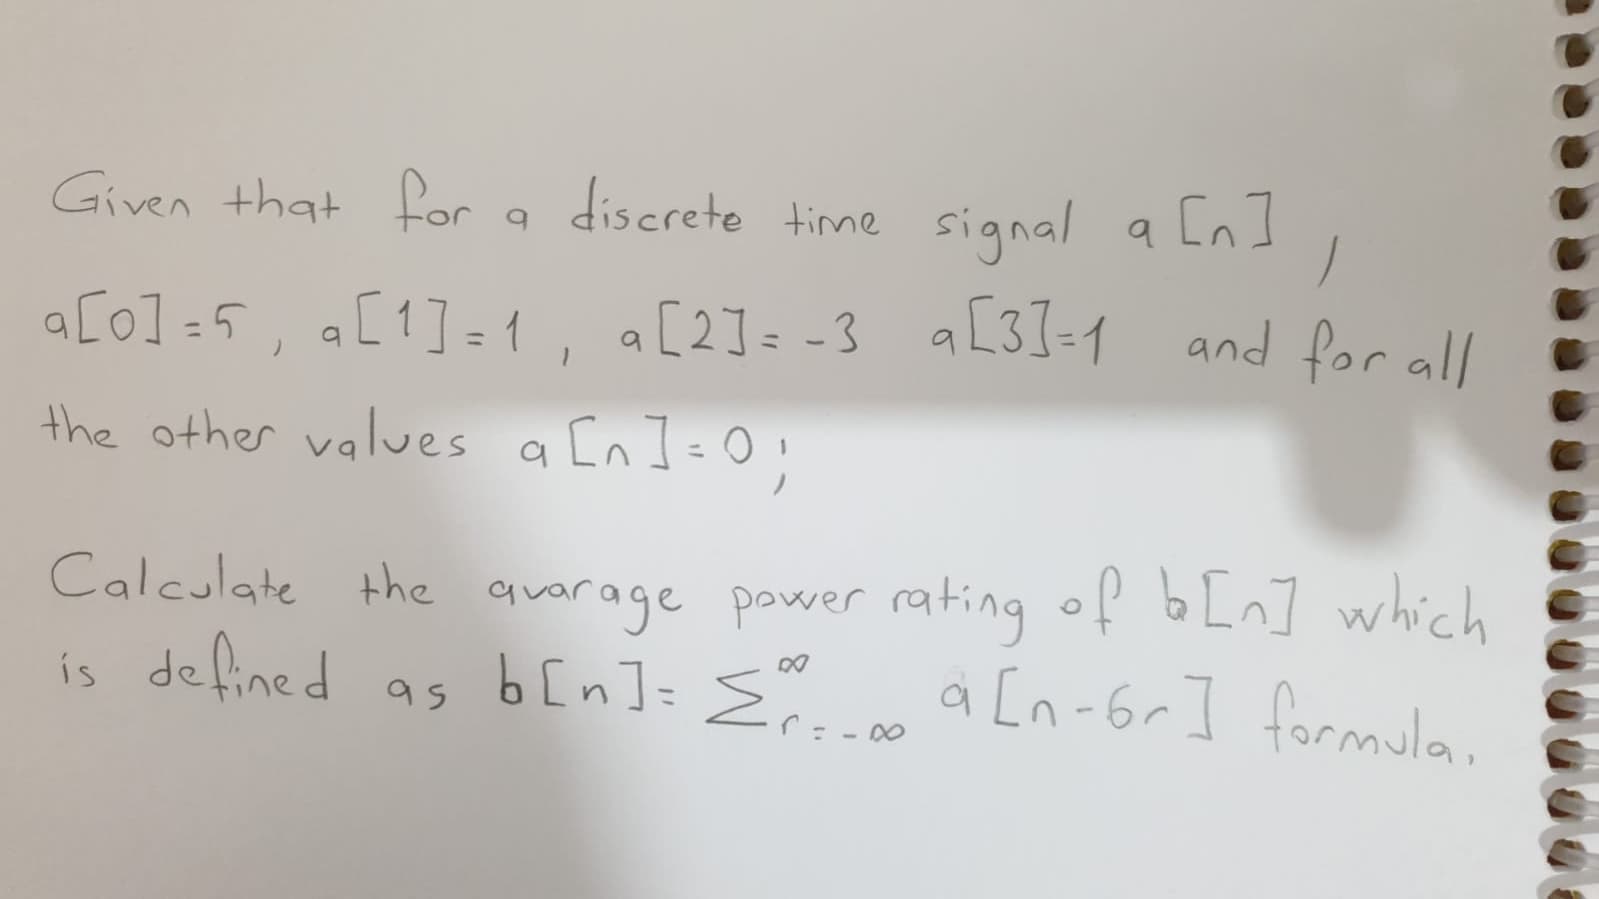 Given that for a discrete tine signal a [n
a [n]
a[o] =5, a[1]=1, a[2]= -3 aL31-1 and for al/
the other values a [n ]=0;
%3D
Calculate the quarage power rating of b Ln] which
is defined as b[n]= { a [n-6r] formula
.
%3D
